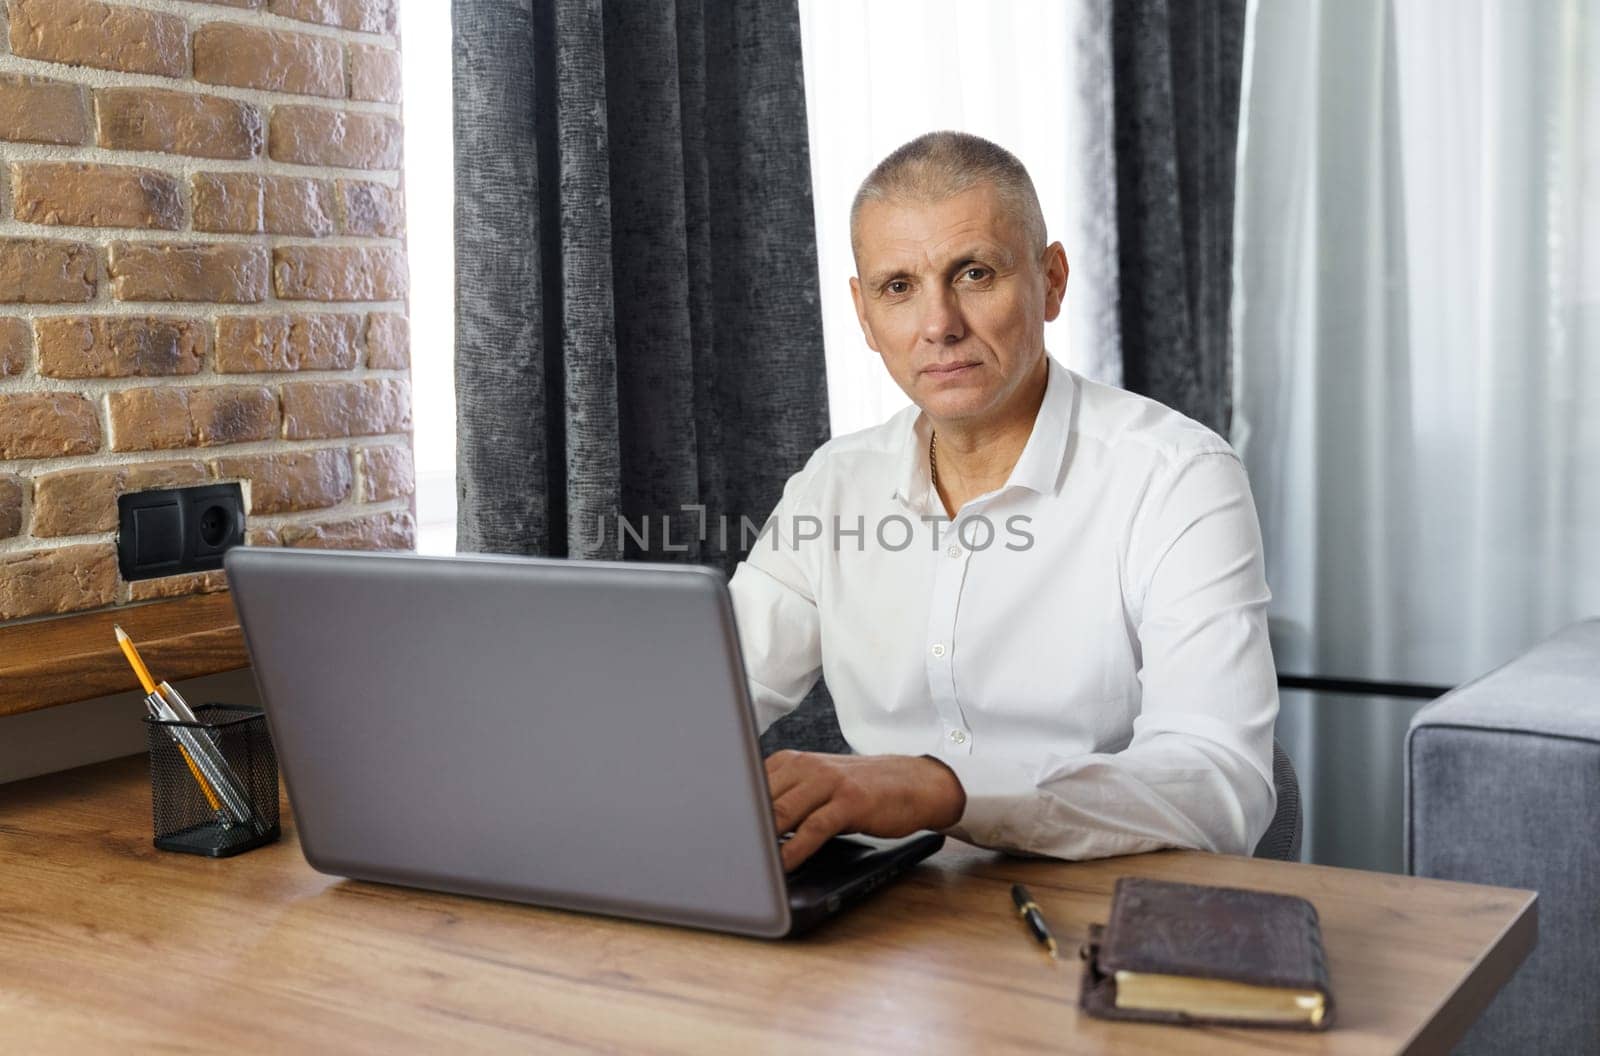 Portrait of middle aged business man working at home with laptop. Remote business concept.